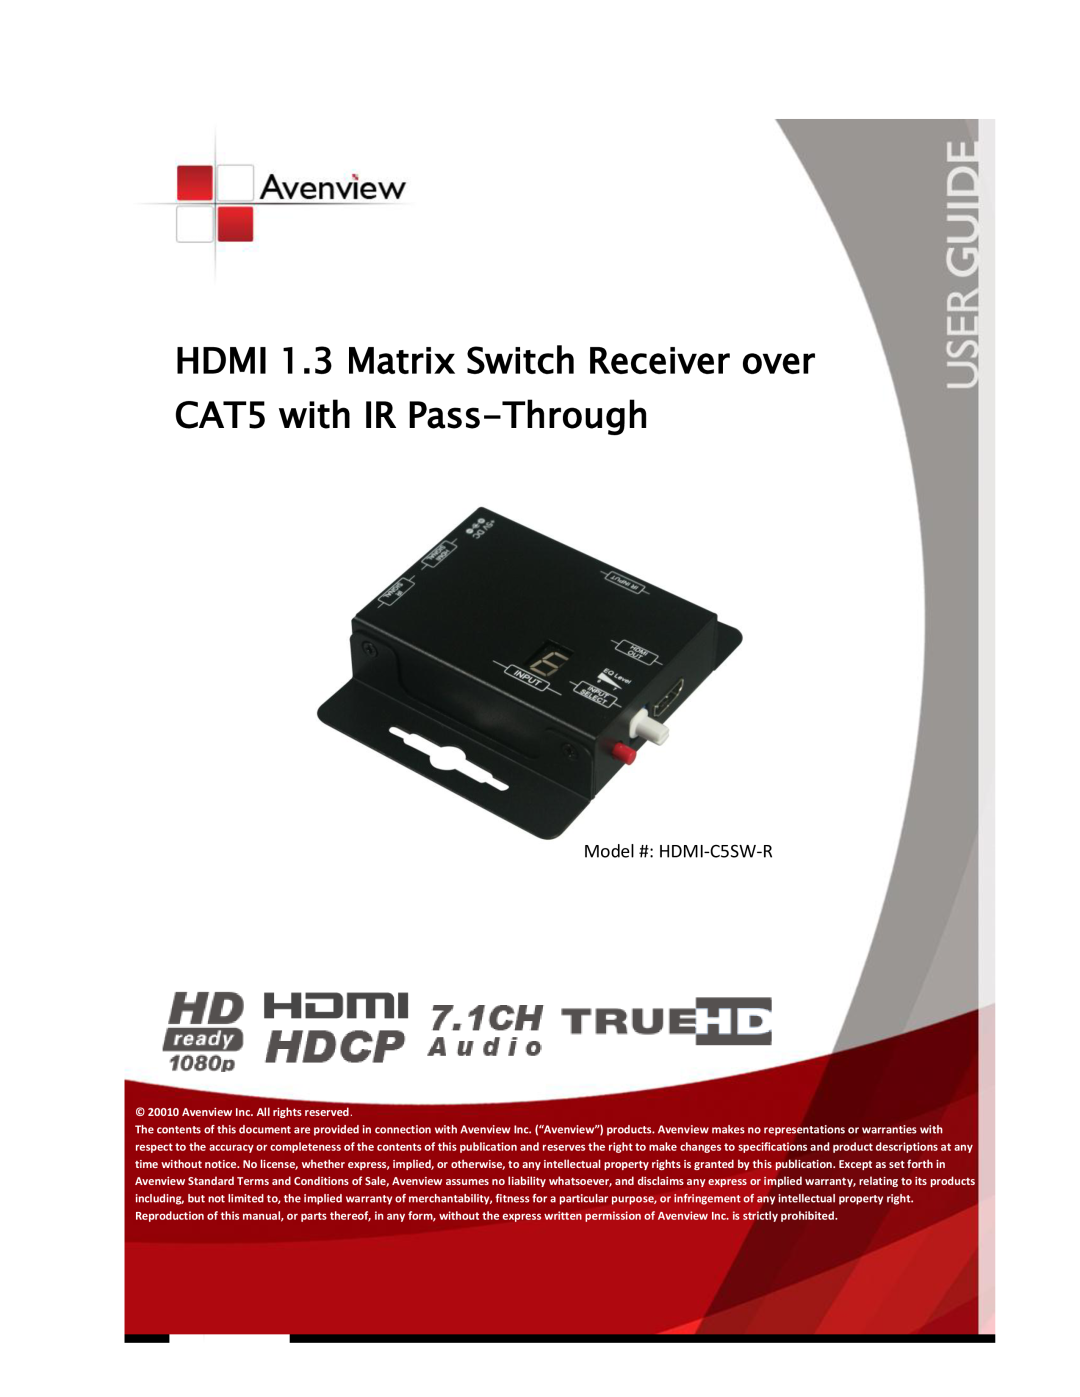 Avenview specifications Model # HDMI-C5SW-R 